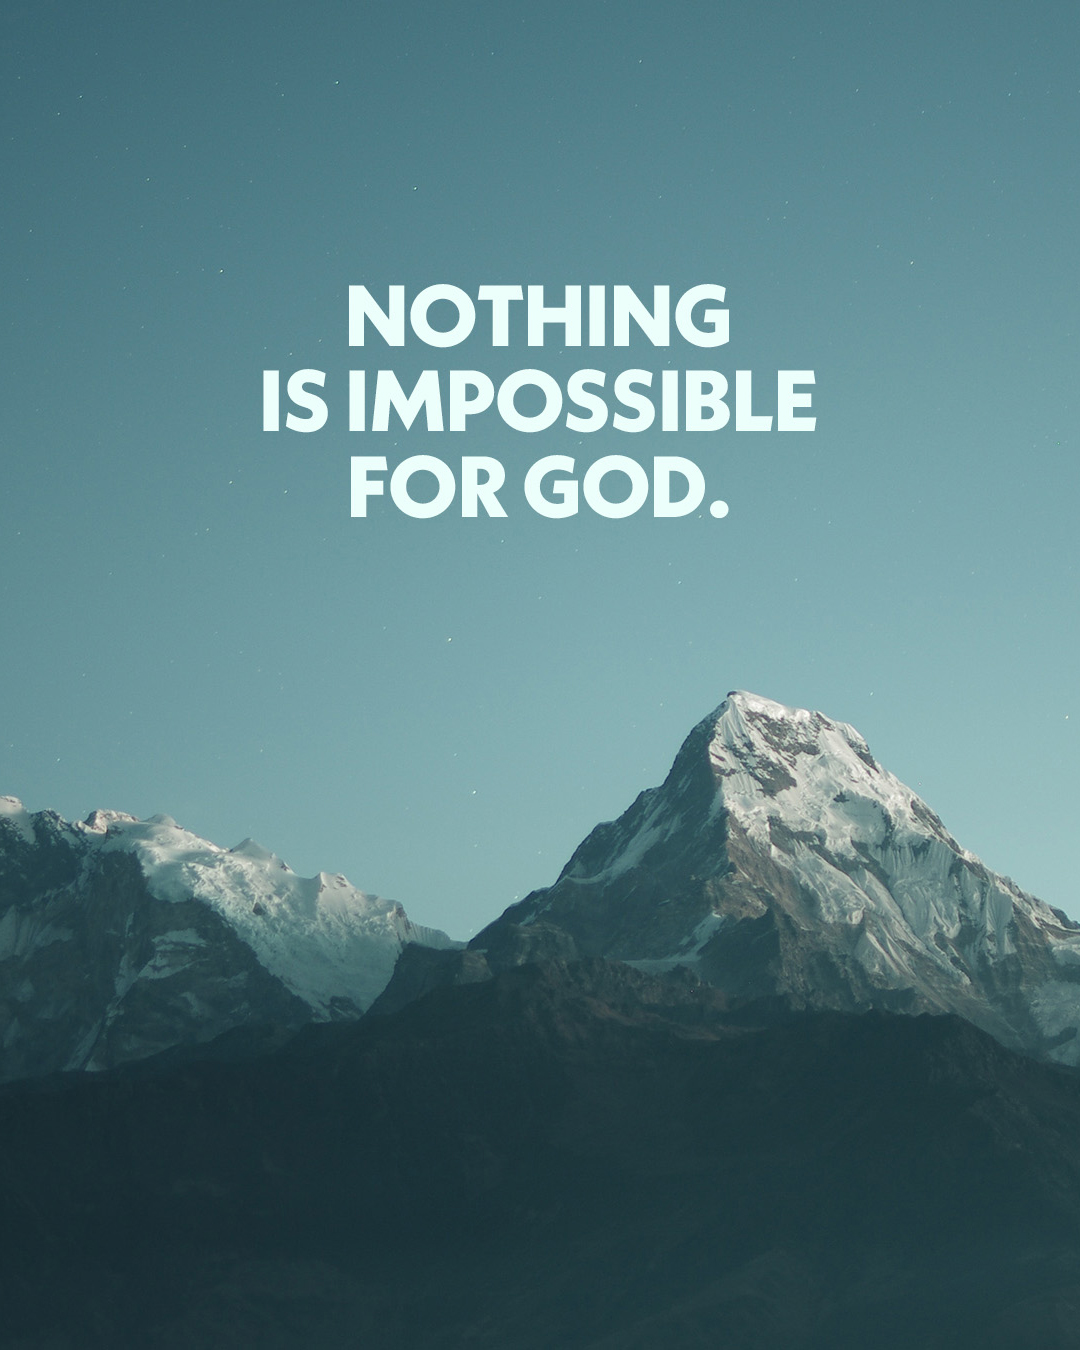 Nothing is impossible for God.